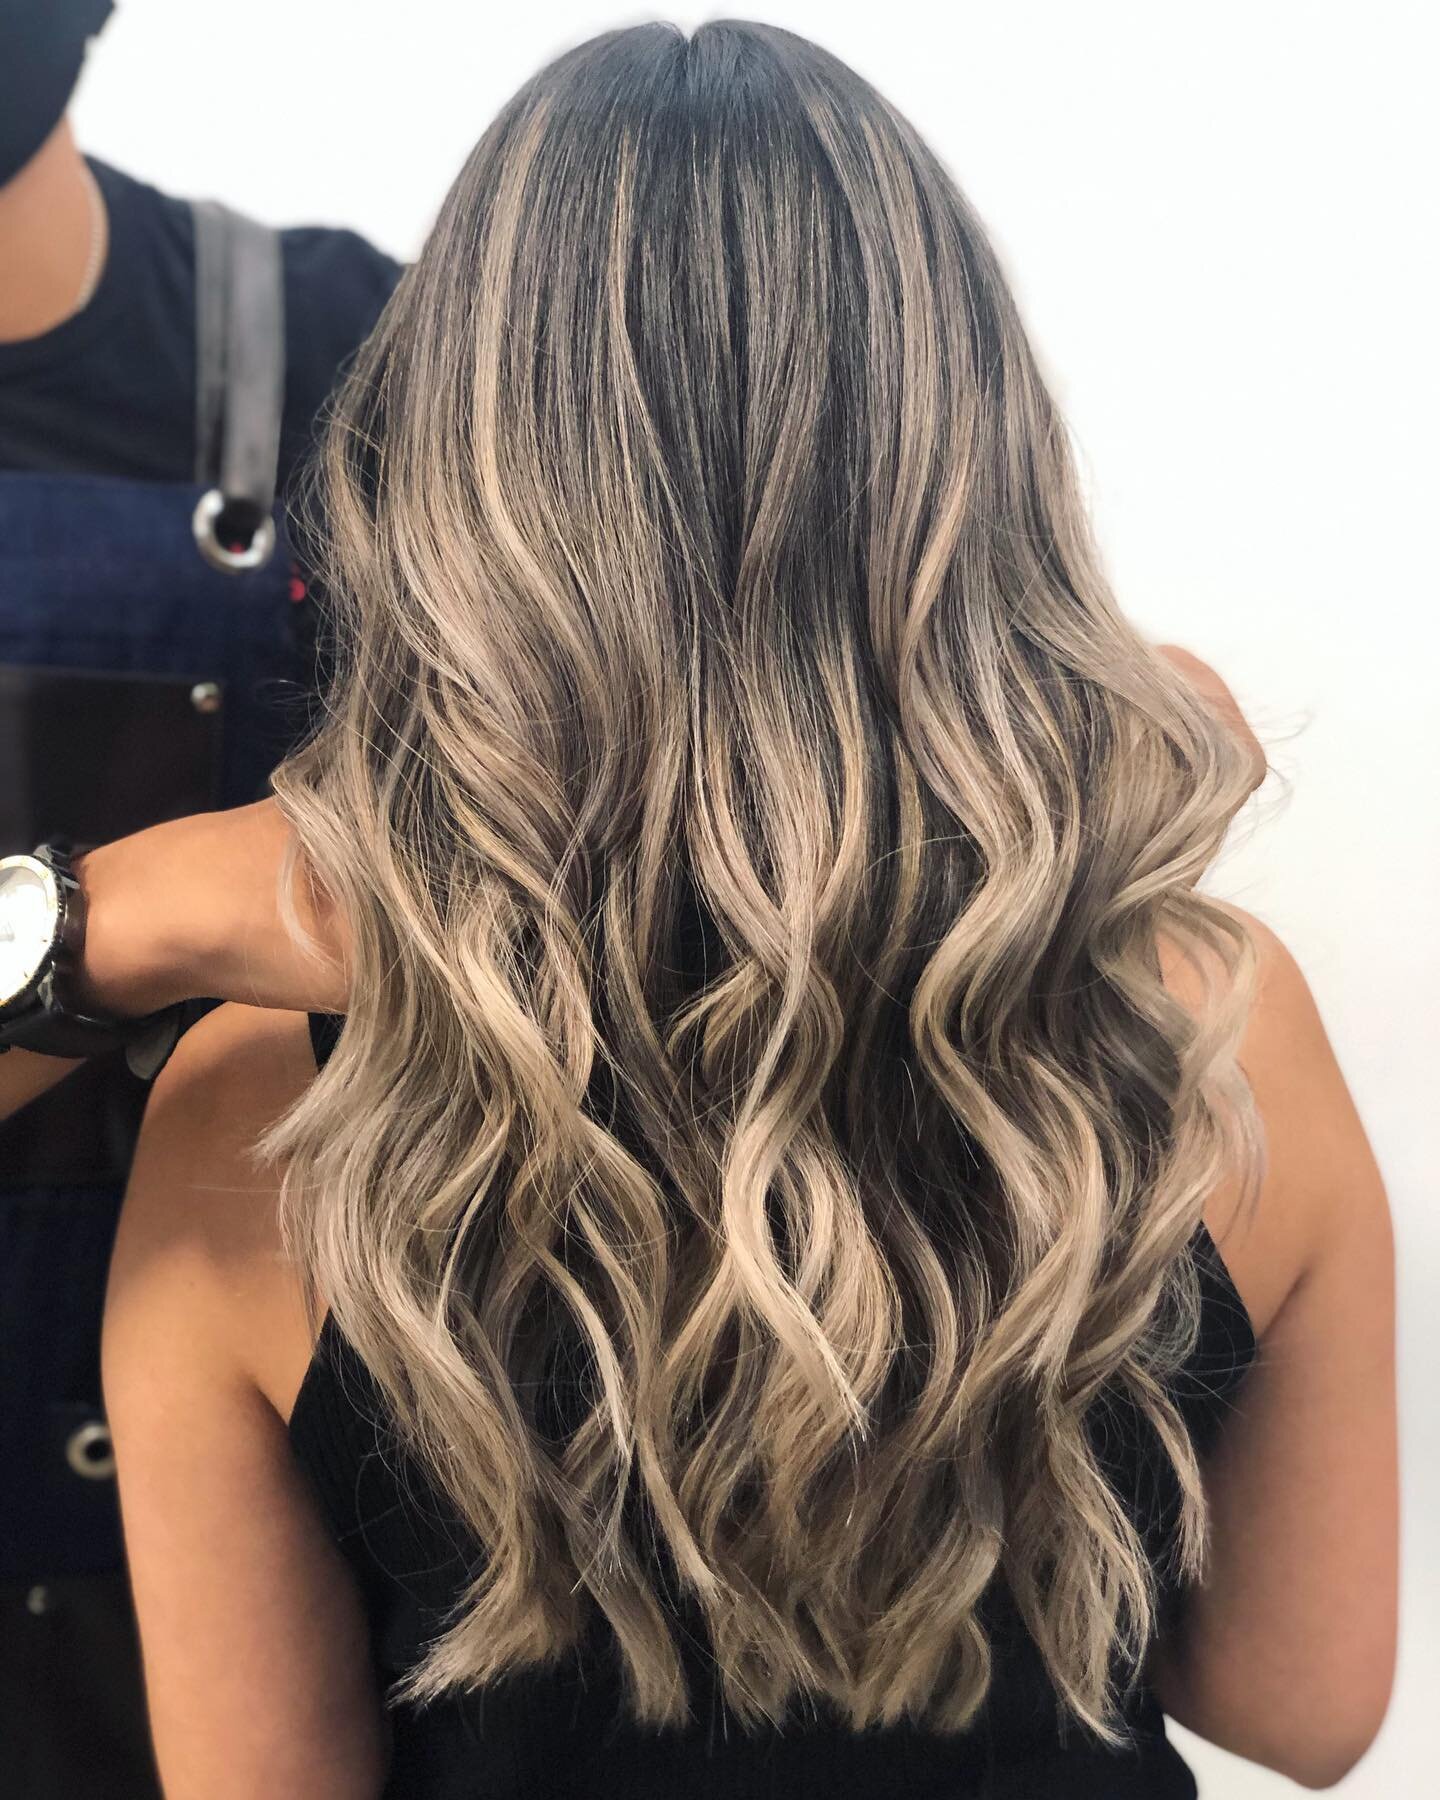 🤑🤑🤑March Deal 🤑🤑🤑

***Schedule two or more services by the end of March and receive 30% off ONE SERVICE of your choice! 

Questions or Quotes ? Direct message me  @igna.hair or text/call 703-459-1099!

#balayage #babyfoils #blonde #blondeondark